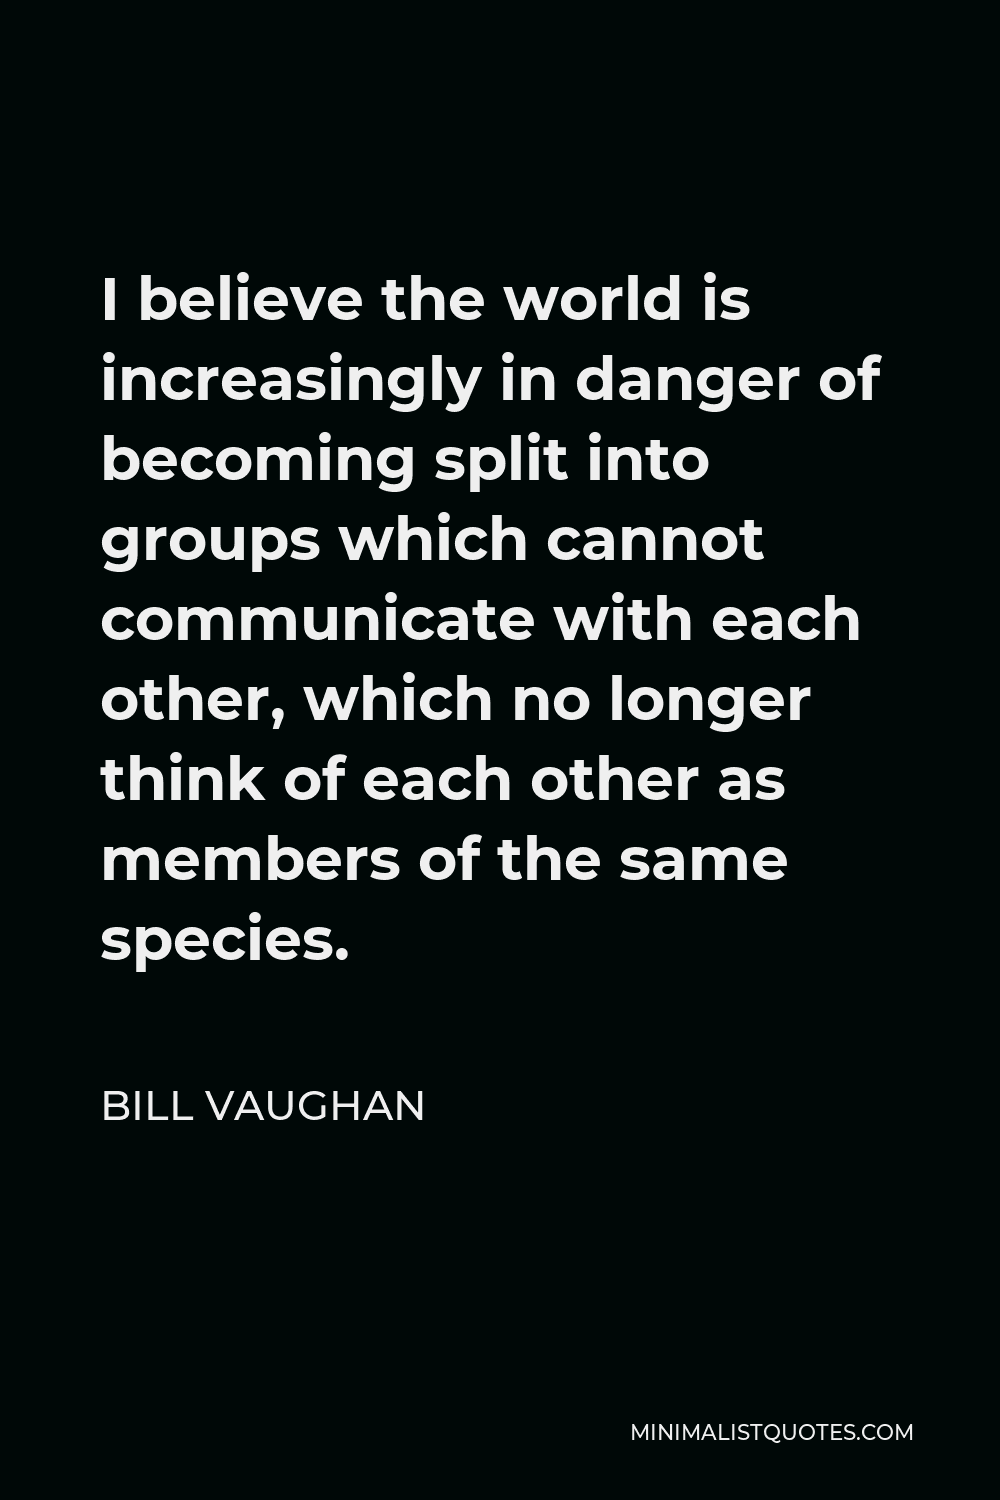 Bill Vaughan Quote - I believe the world is increasingly in danger of becoming split into groups which cannot communicate with each other, which no longer think of each other as members of the same species.